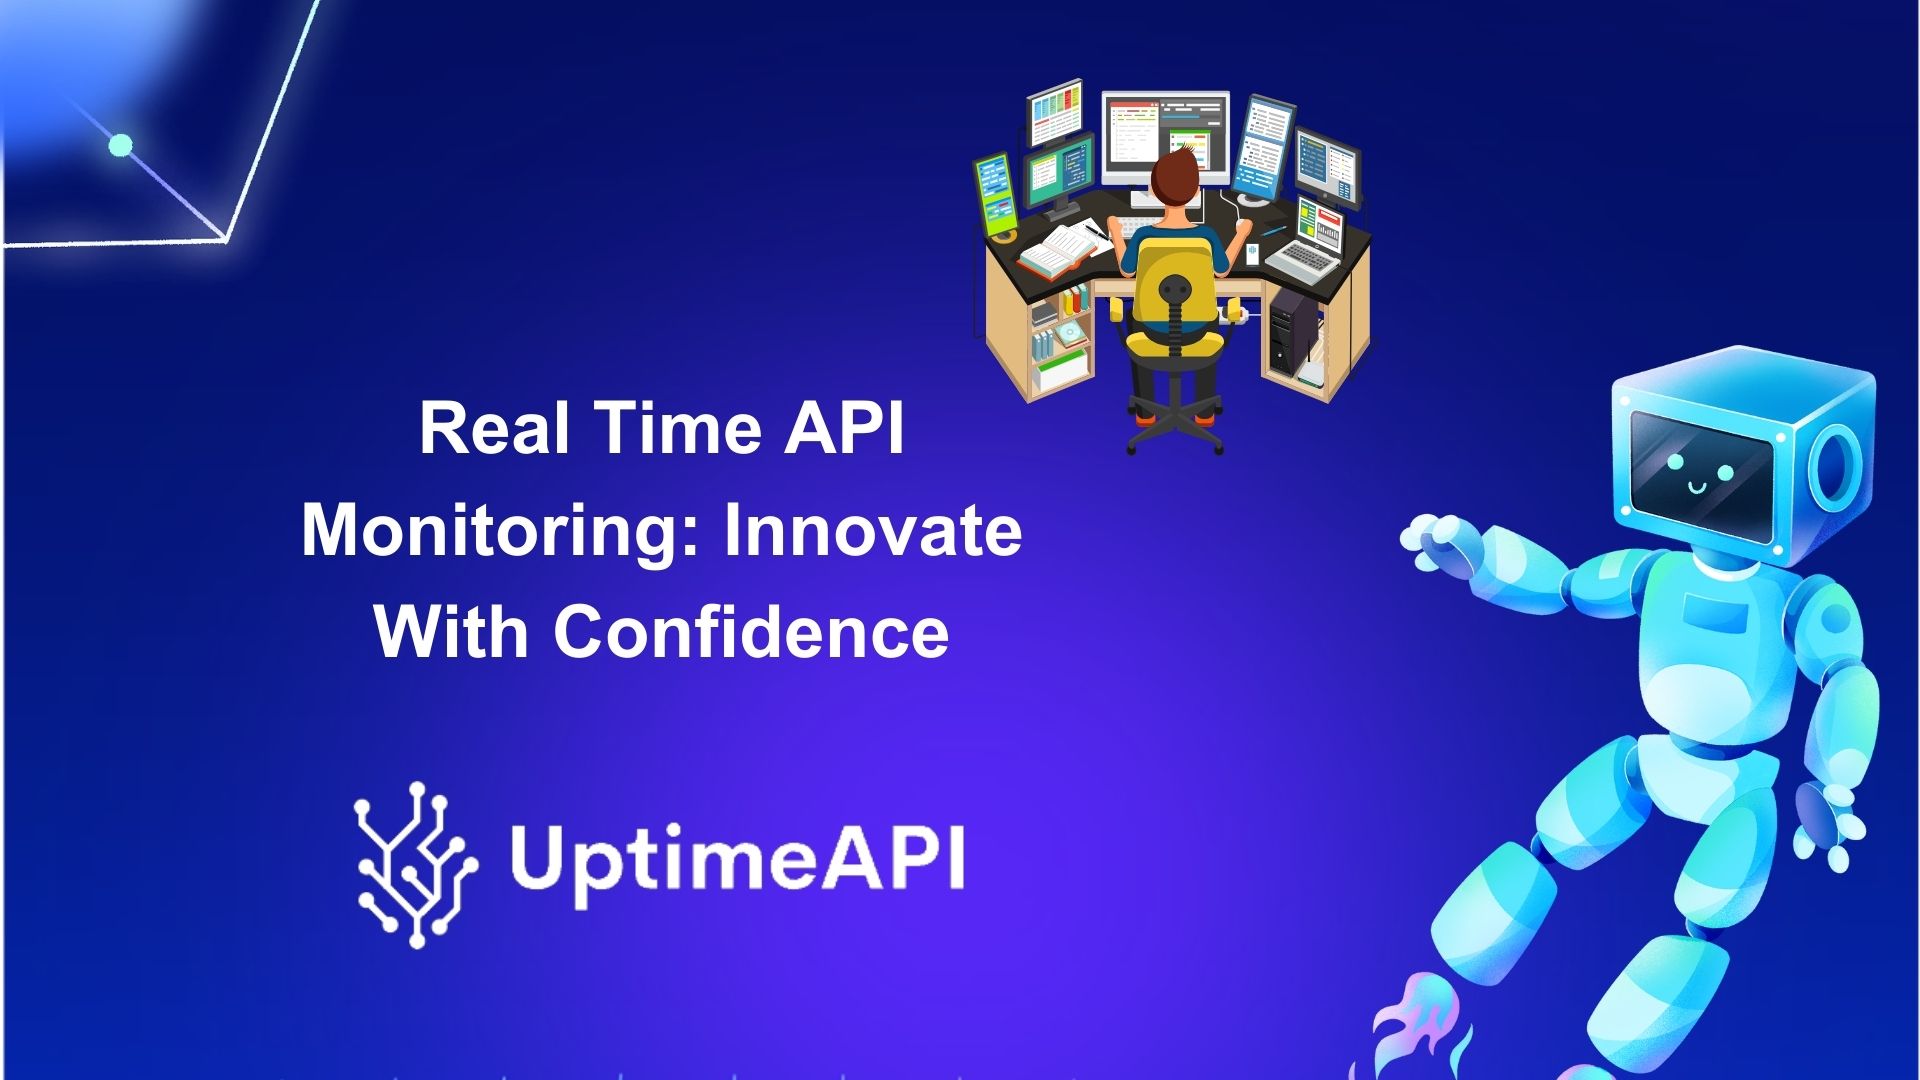 Real Time API Monitoring: Innovate With Confidence